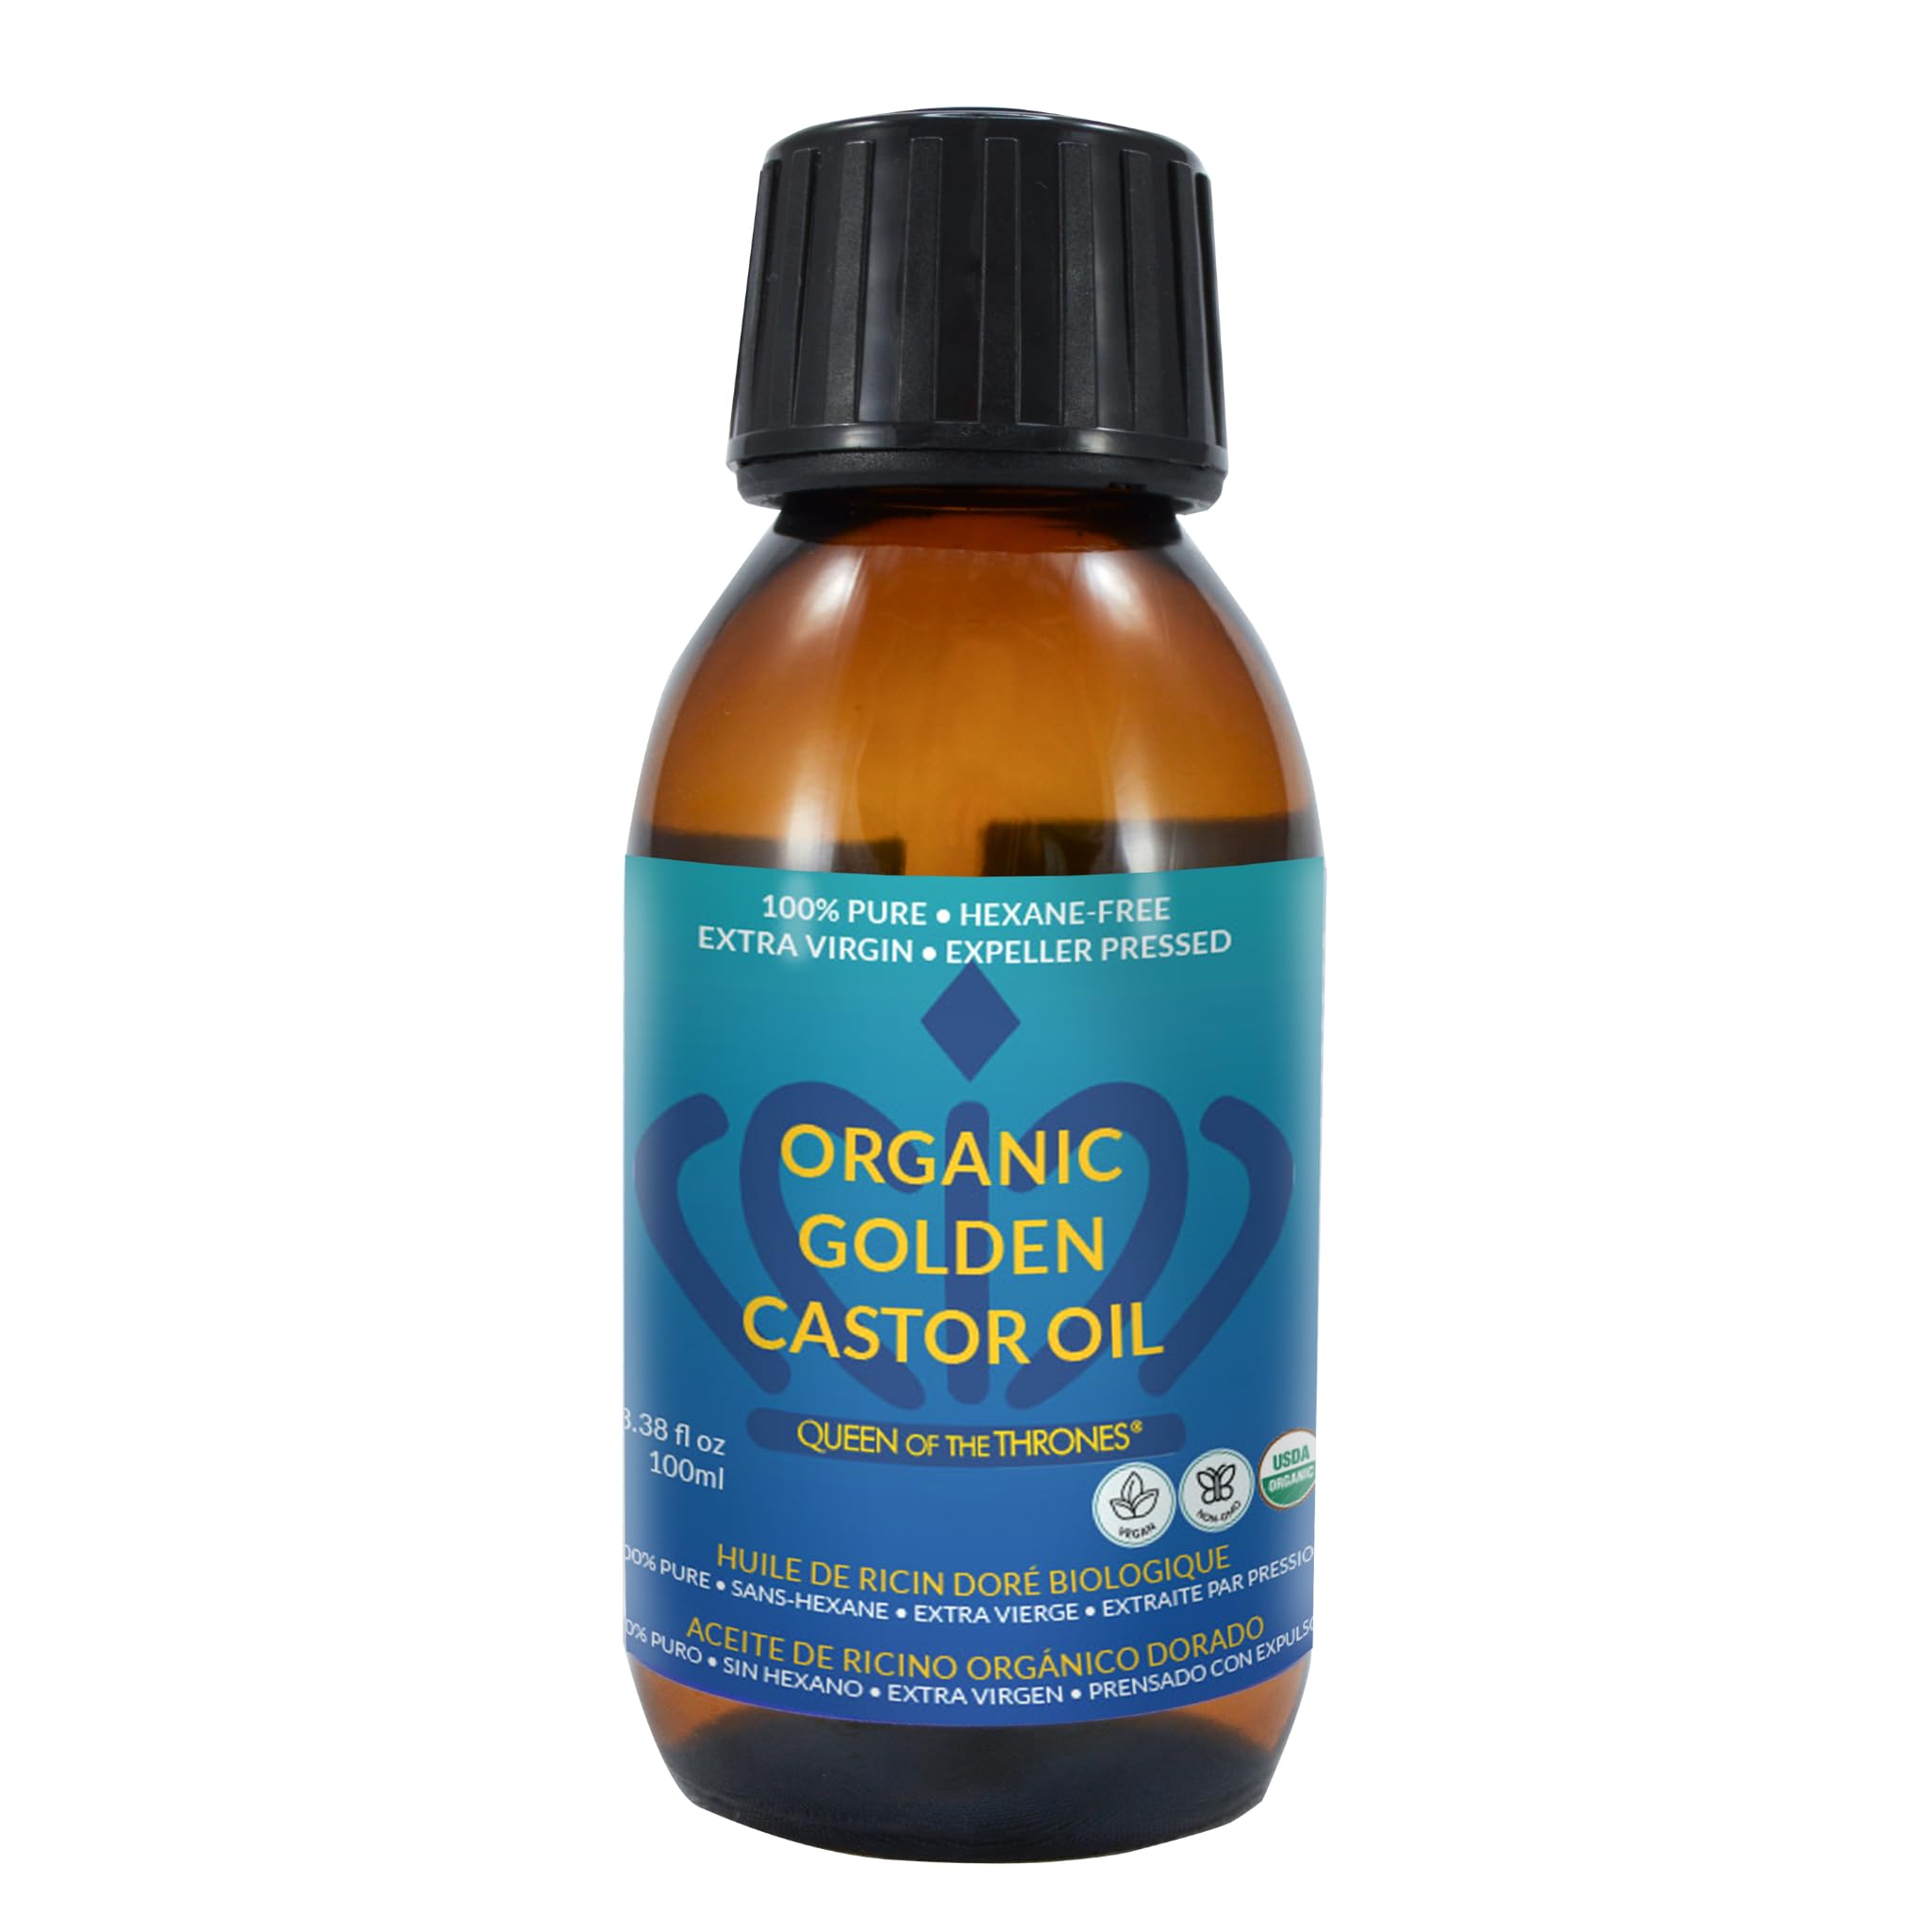 QUEEN OF THE THRONES Organic Golden Castor Oil 3.38 oz (100 ml) | 100% Pure, Certified Organic, Hexane-Free, Extra Virgin | Moisturizing & Conditioning Oil for Skin, Hair & Nails